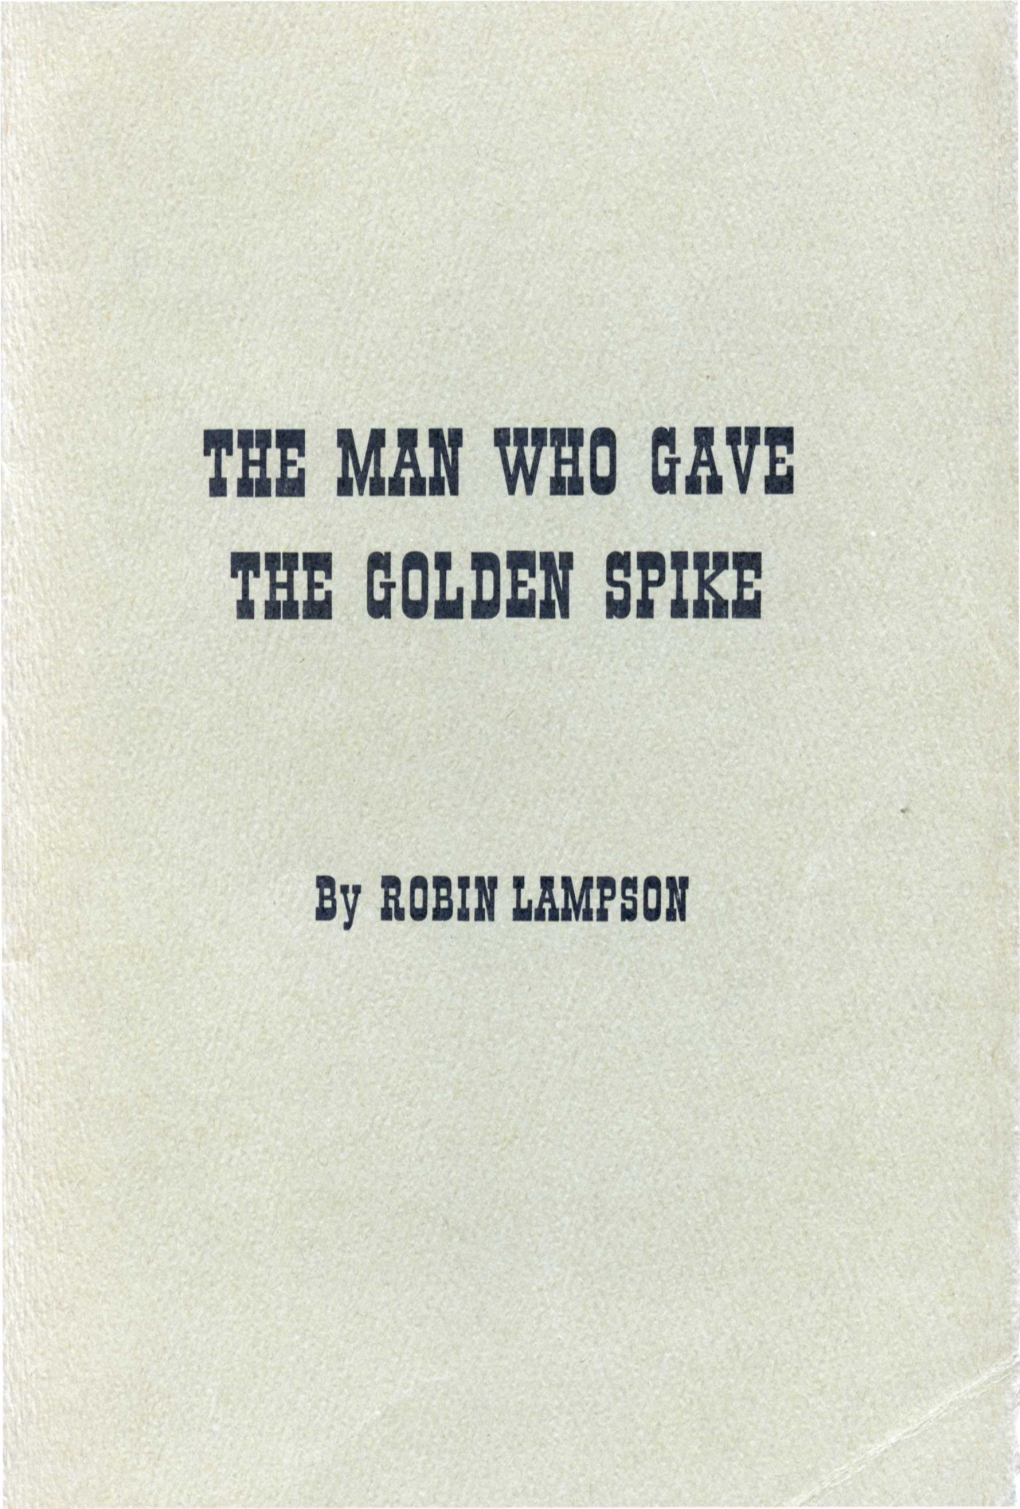 The Man Who Cave the Golden Spike